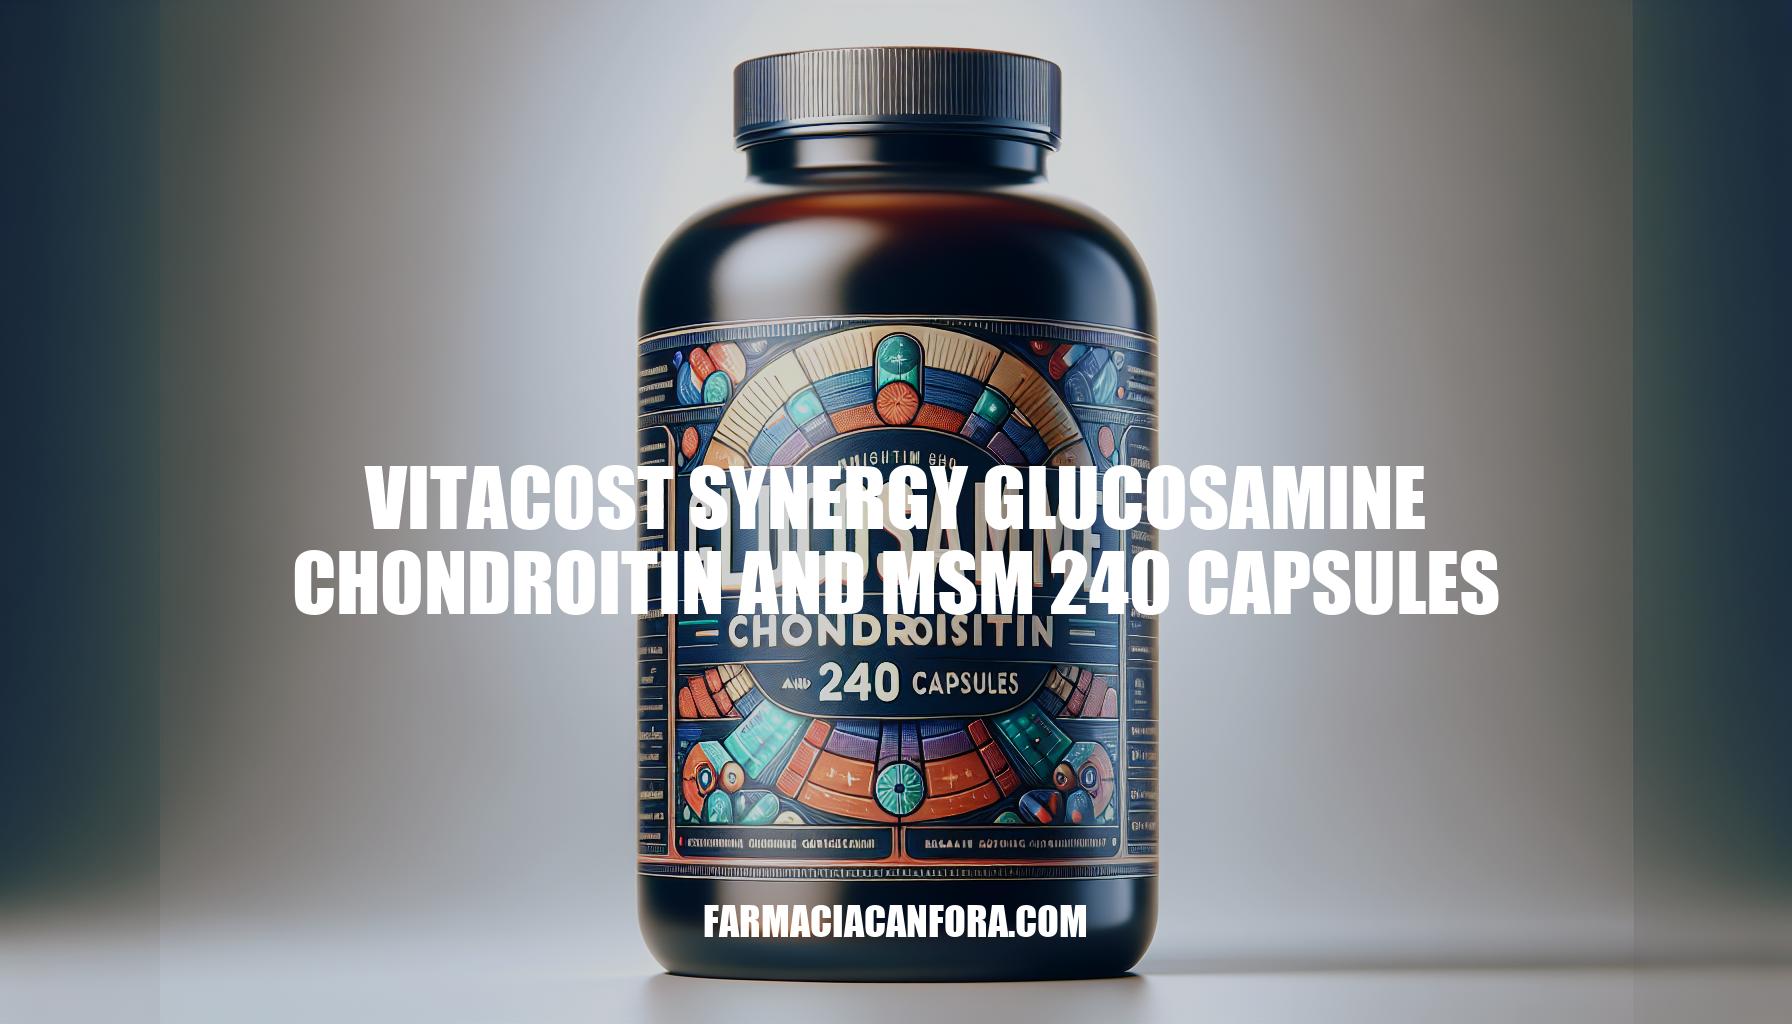 Vitacost Synergy Glucosamine Chondroitin and MSM 240 Capsules: Benefits and Uses